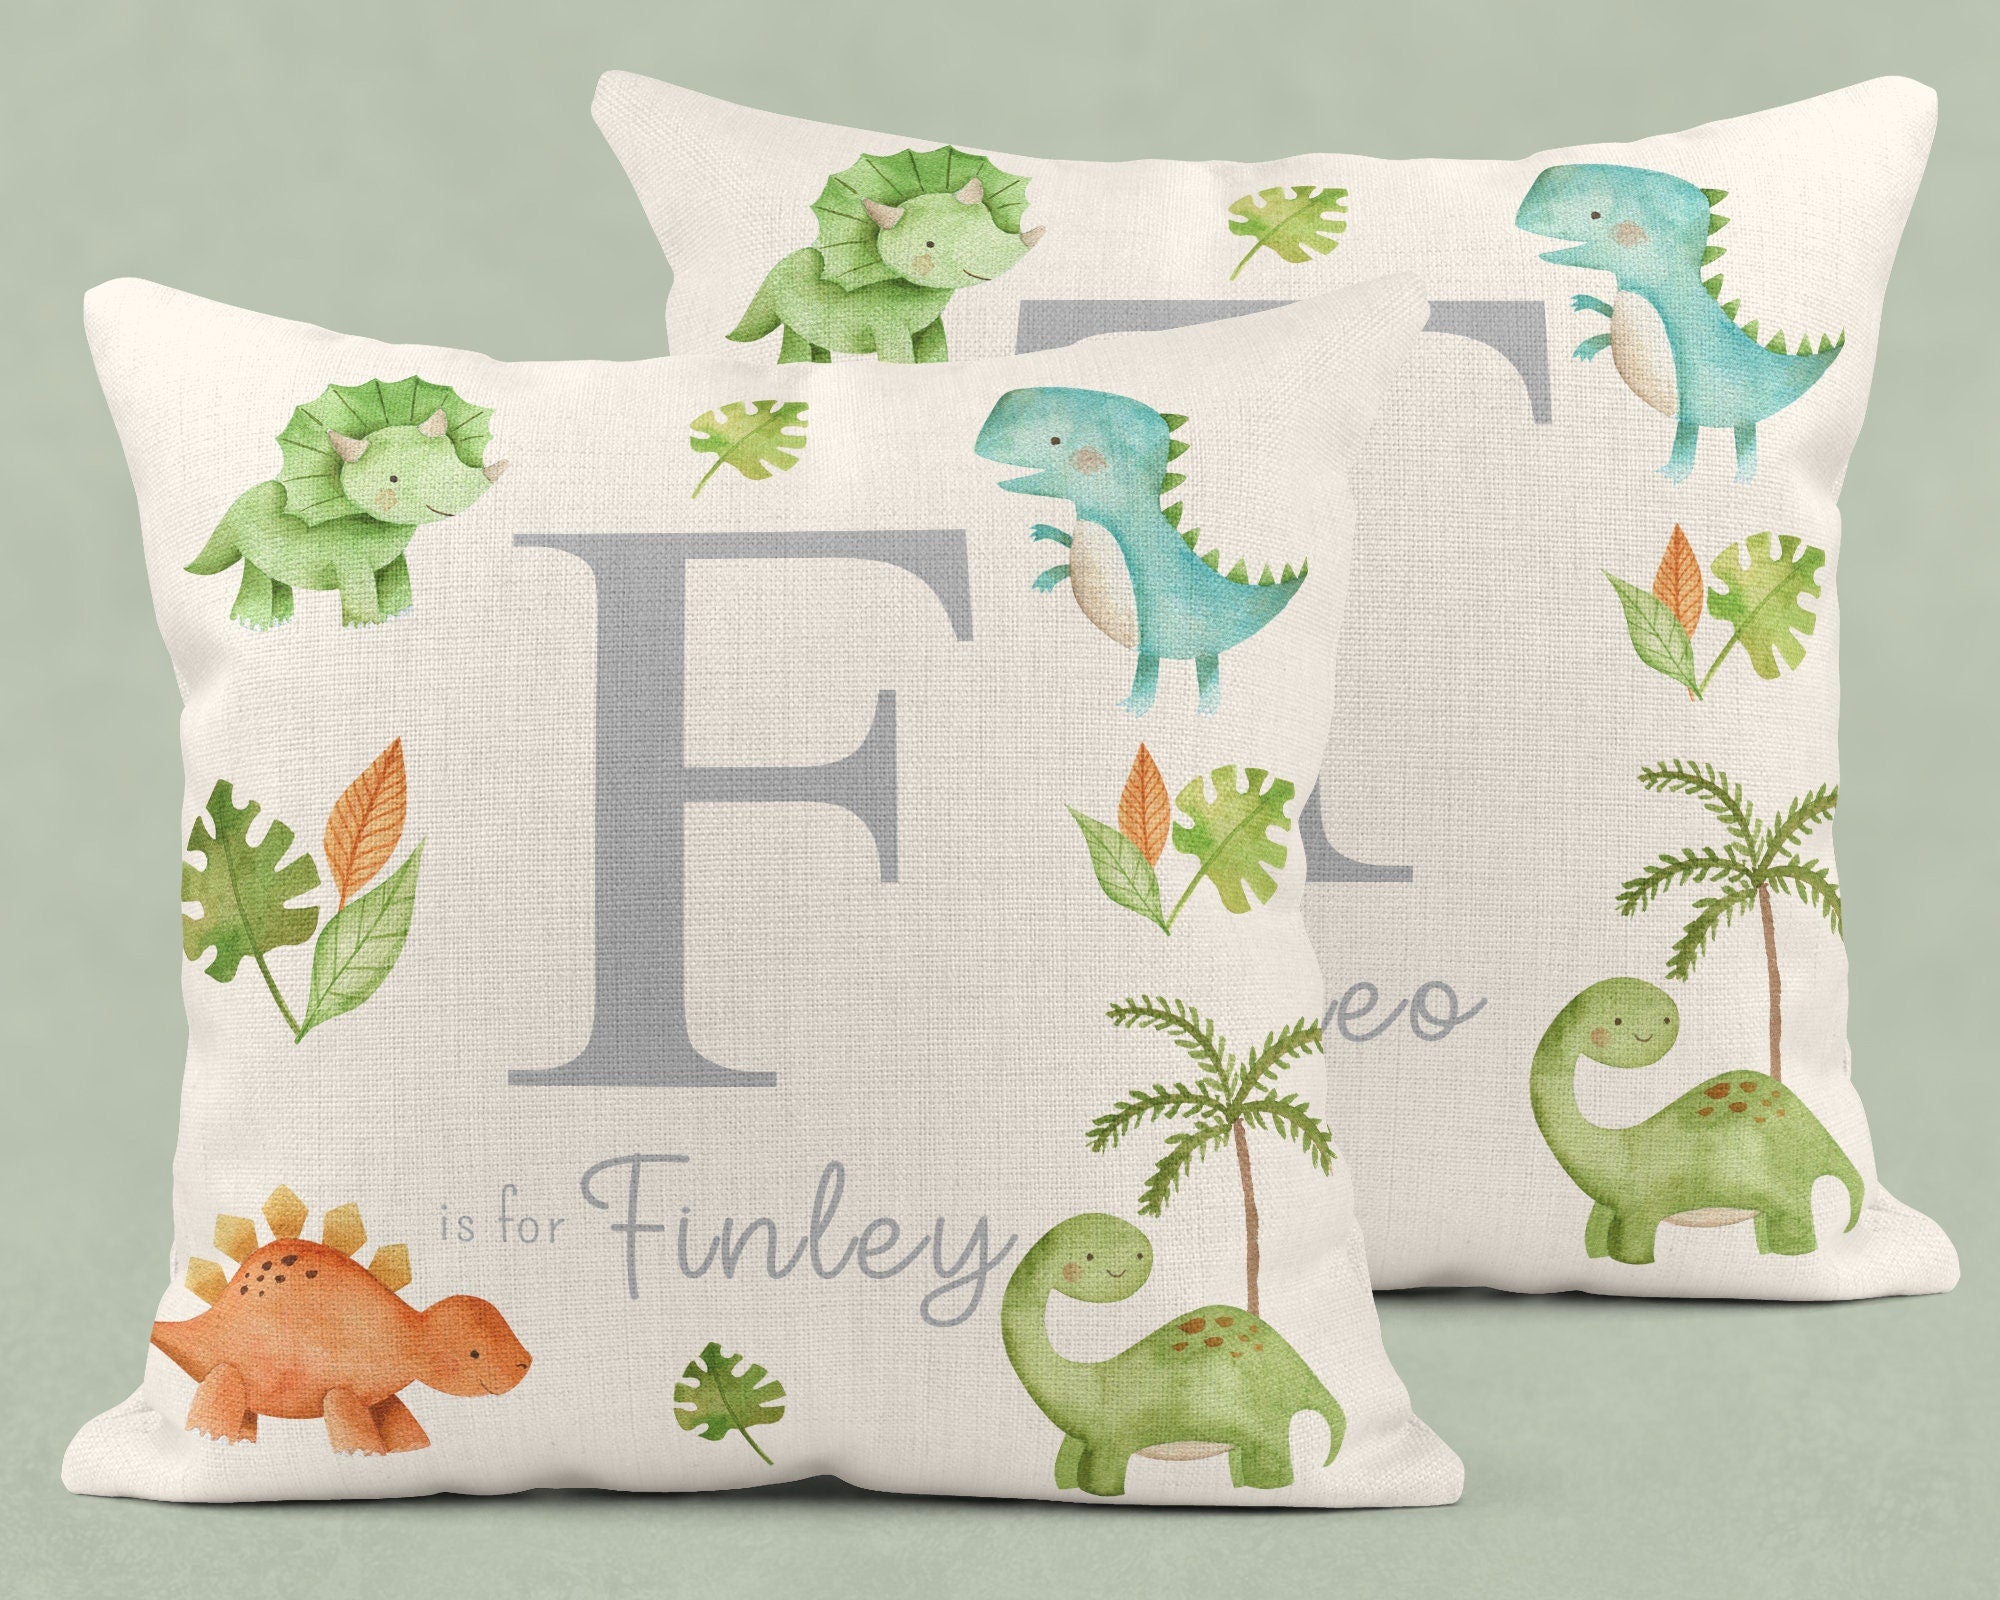 Personalised New Baby Cushion, New Baby Gifts, Dinosaur cushion, New Baby Present, Dinosaur Nursery, Dinosaur Decor, Dinosaur Nursery decor